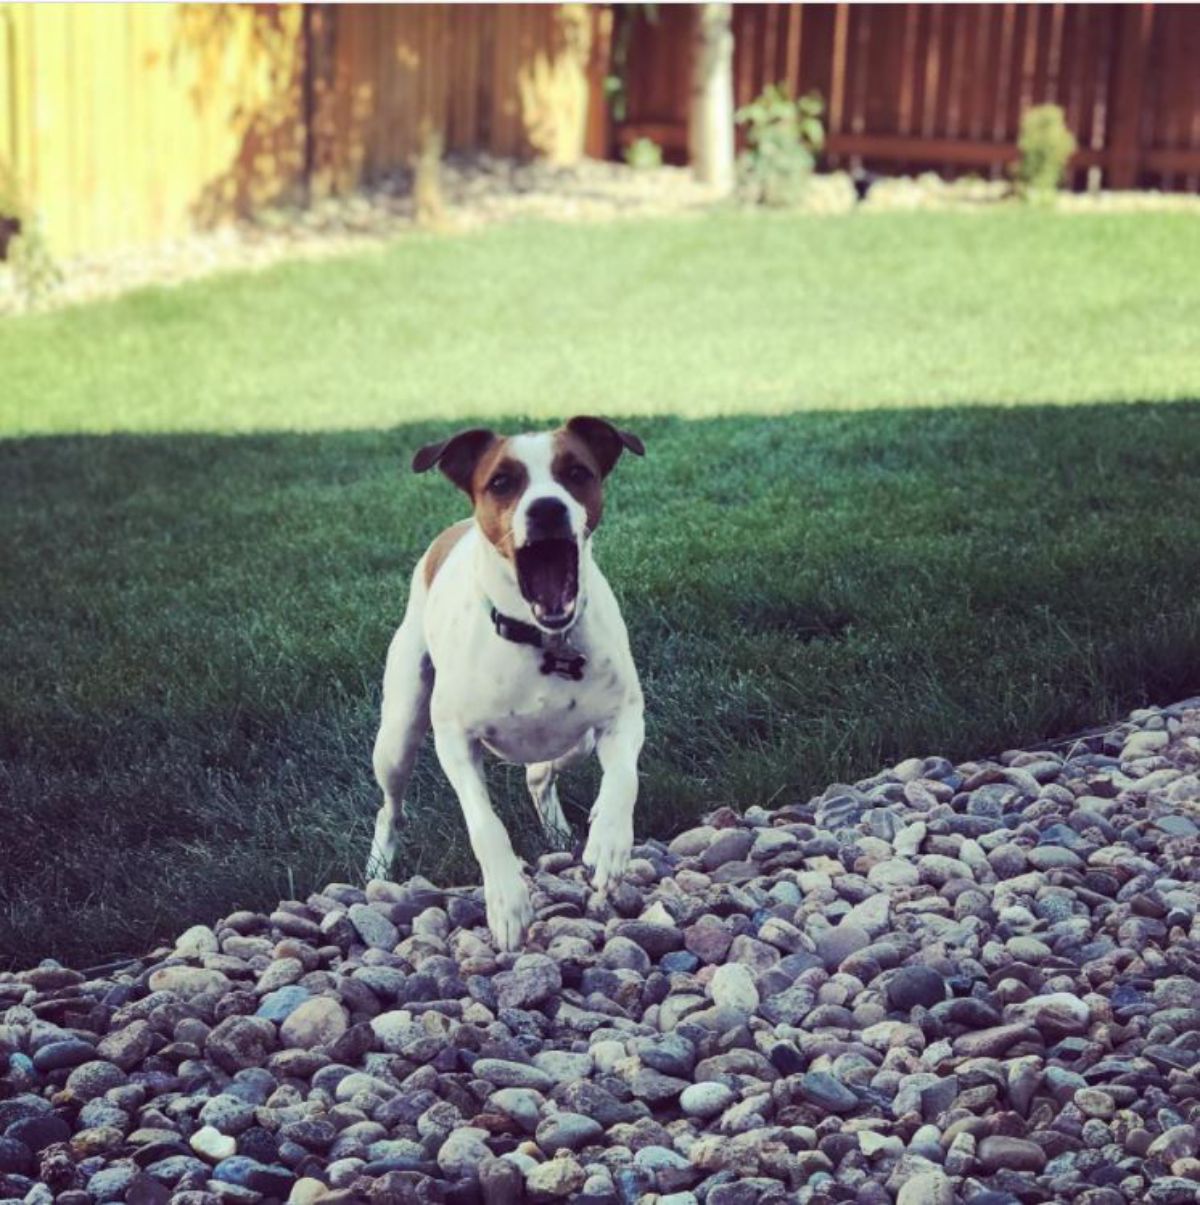 barking Jack Russell dog in the backyard